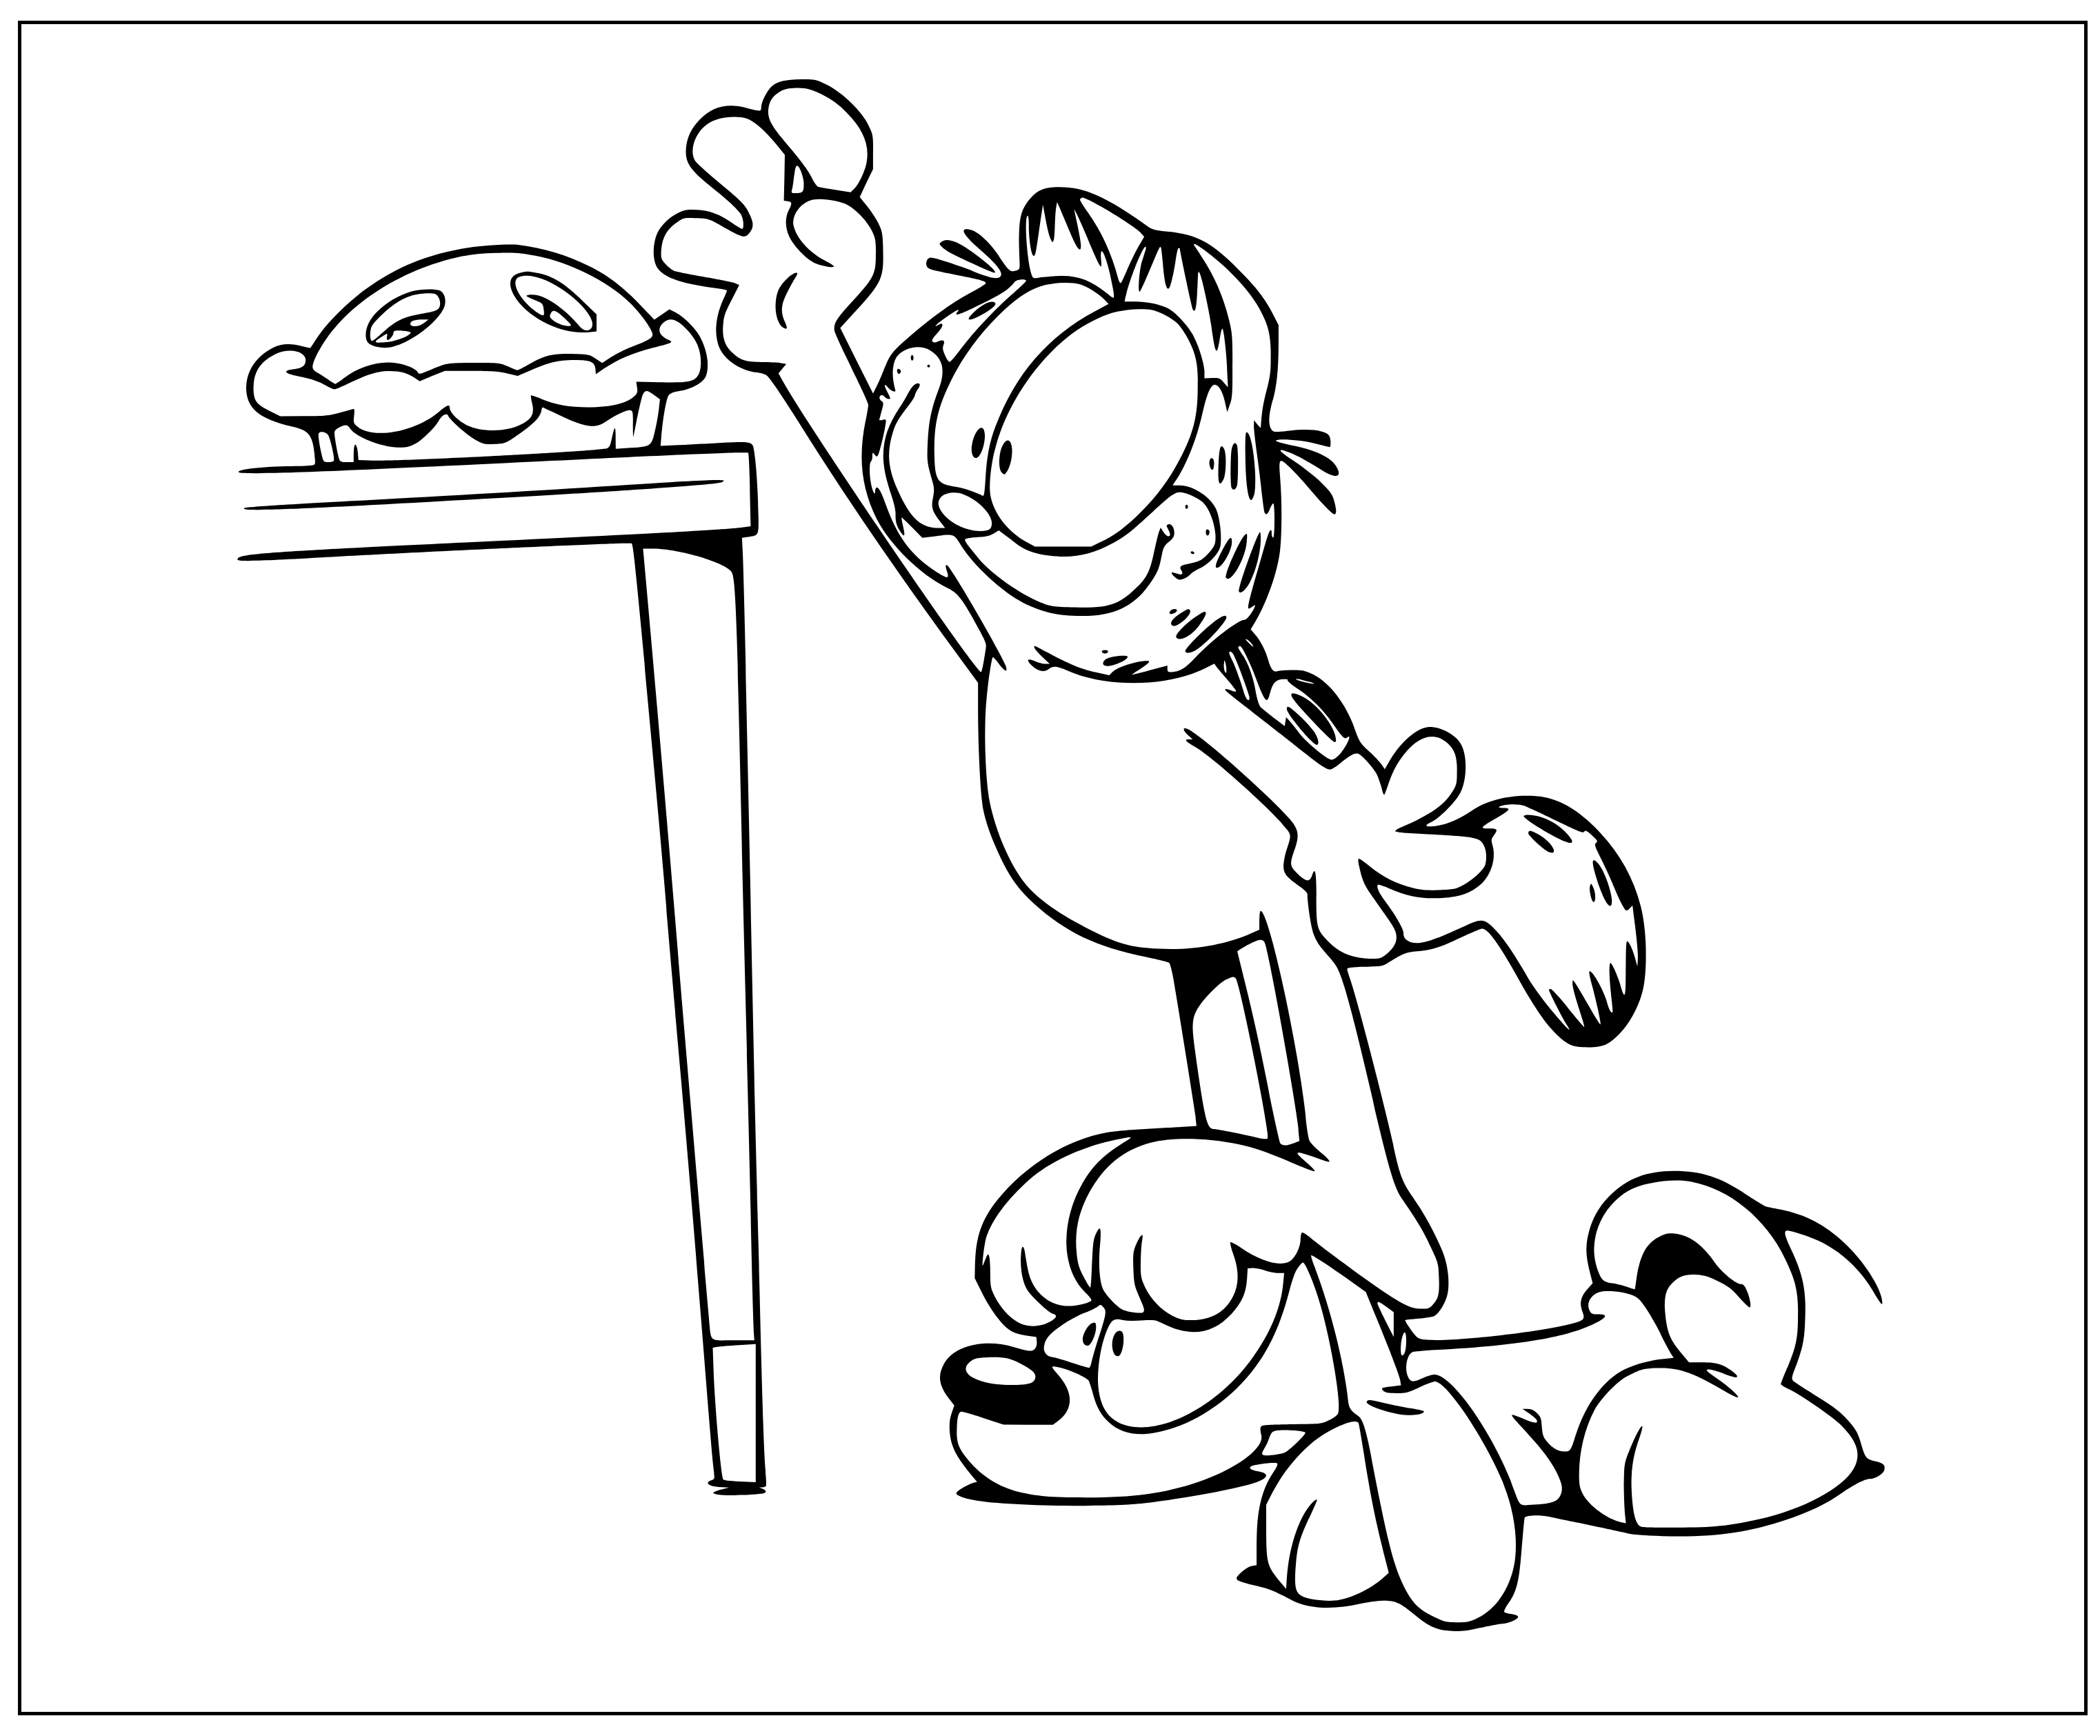 Printable Odie and Garfield eating pie Coloring Page for kids.